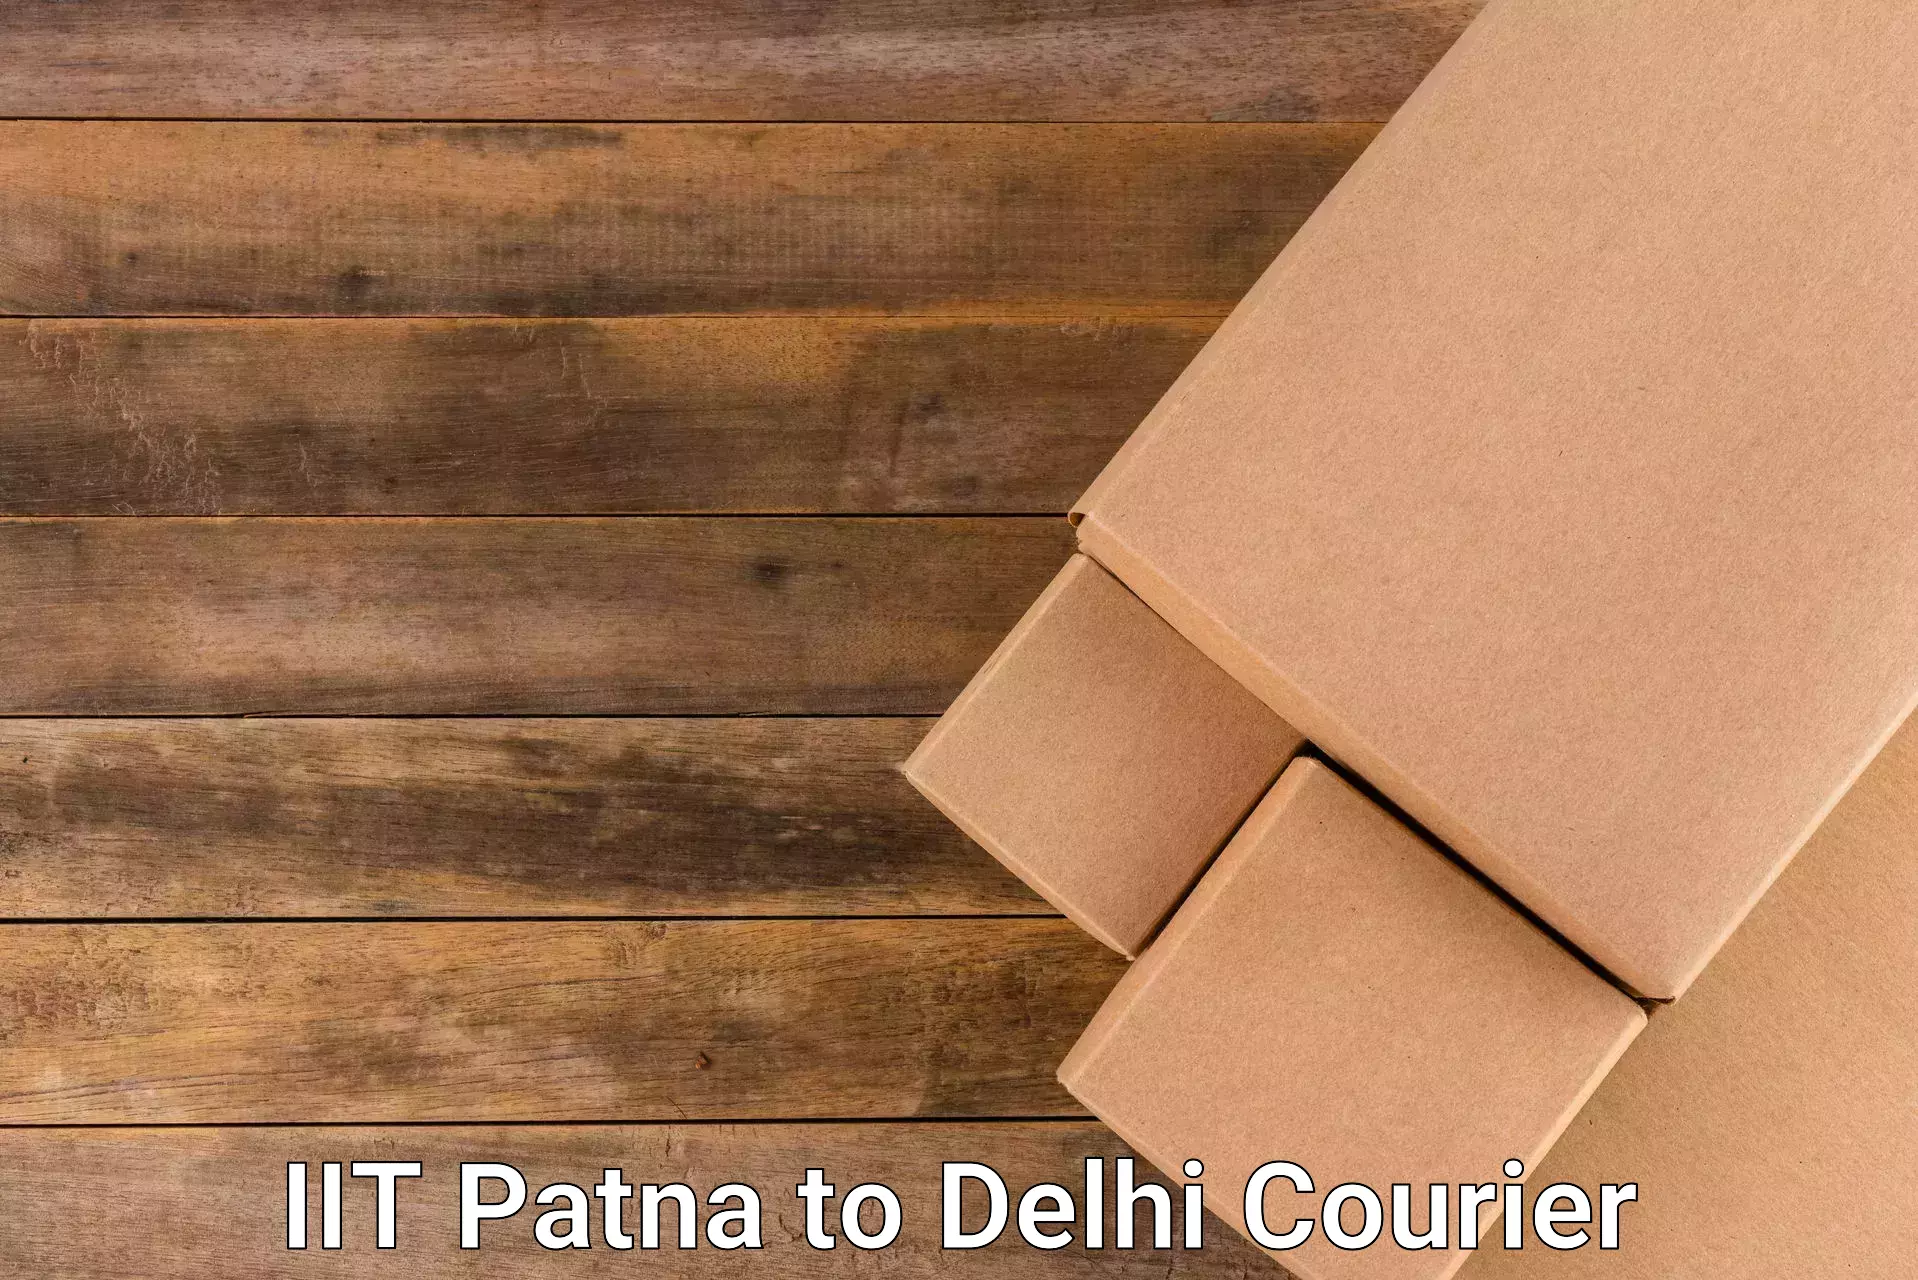 Courier service innovation IIT Patna to Lodhi Road